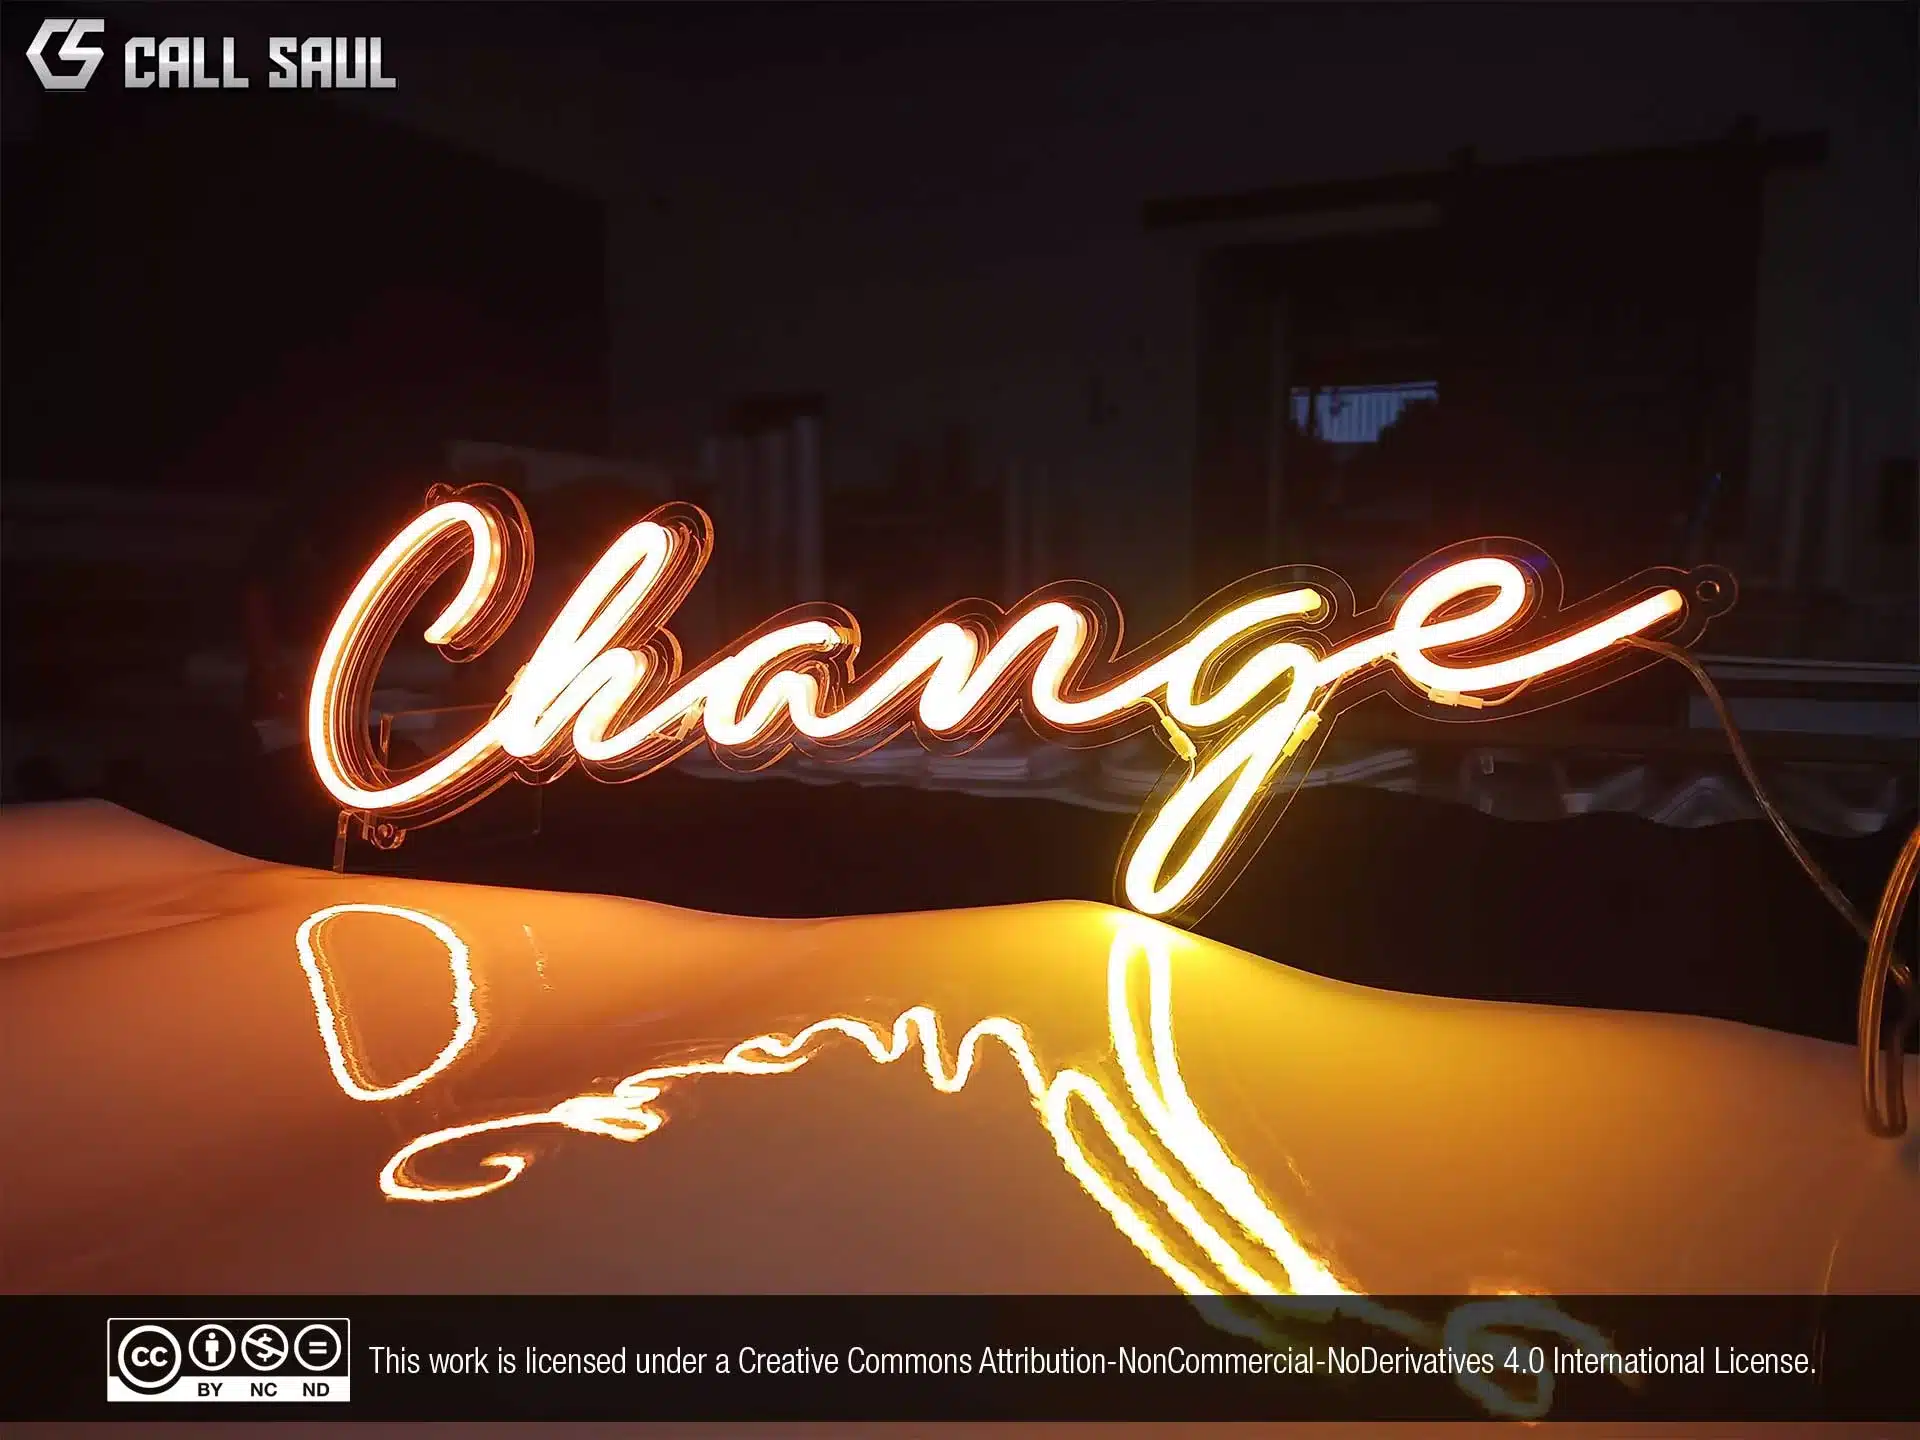 Change Orange and Golden Yellow Color LED Neon Sign